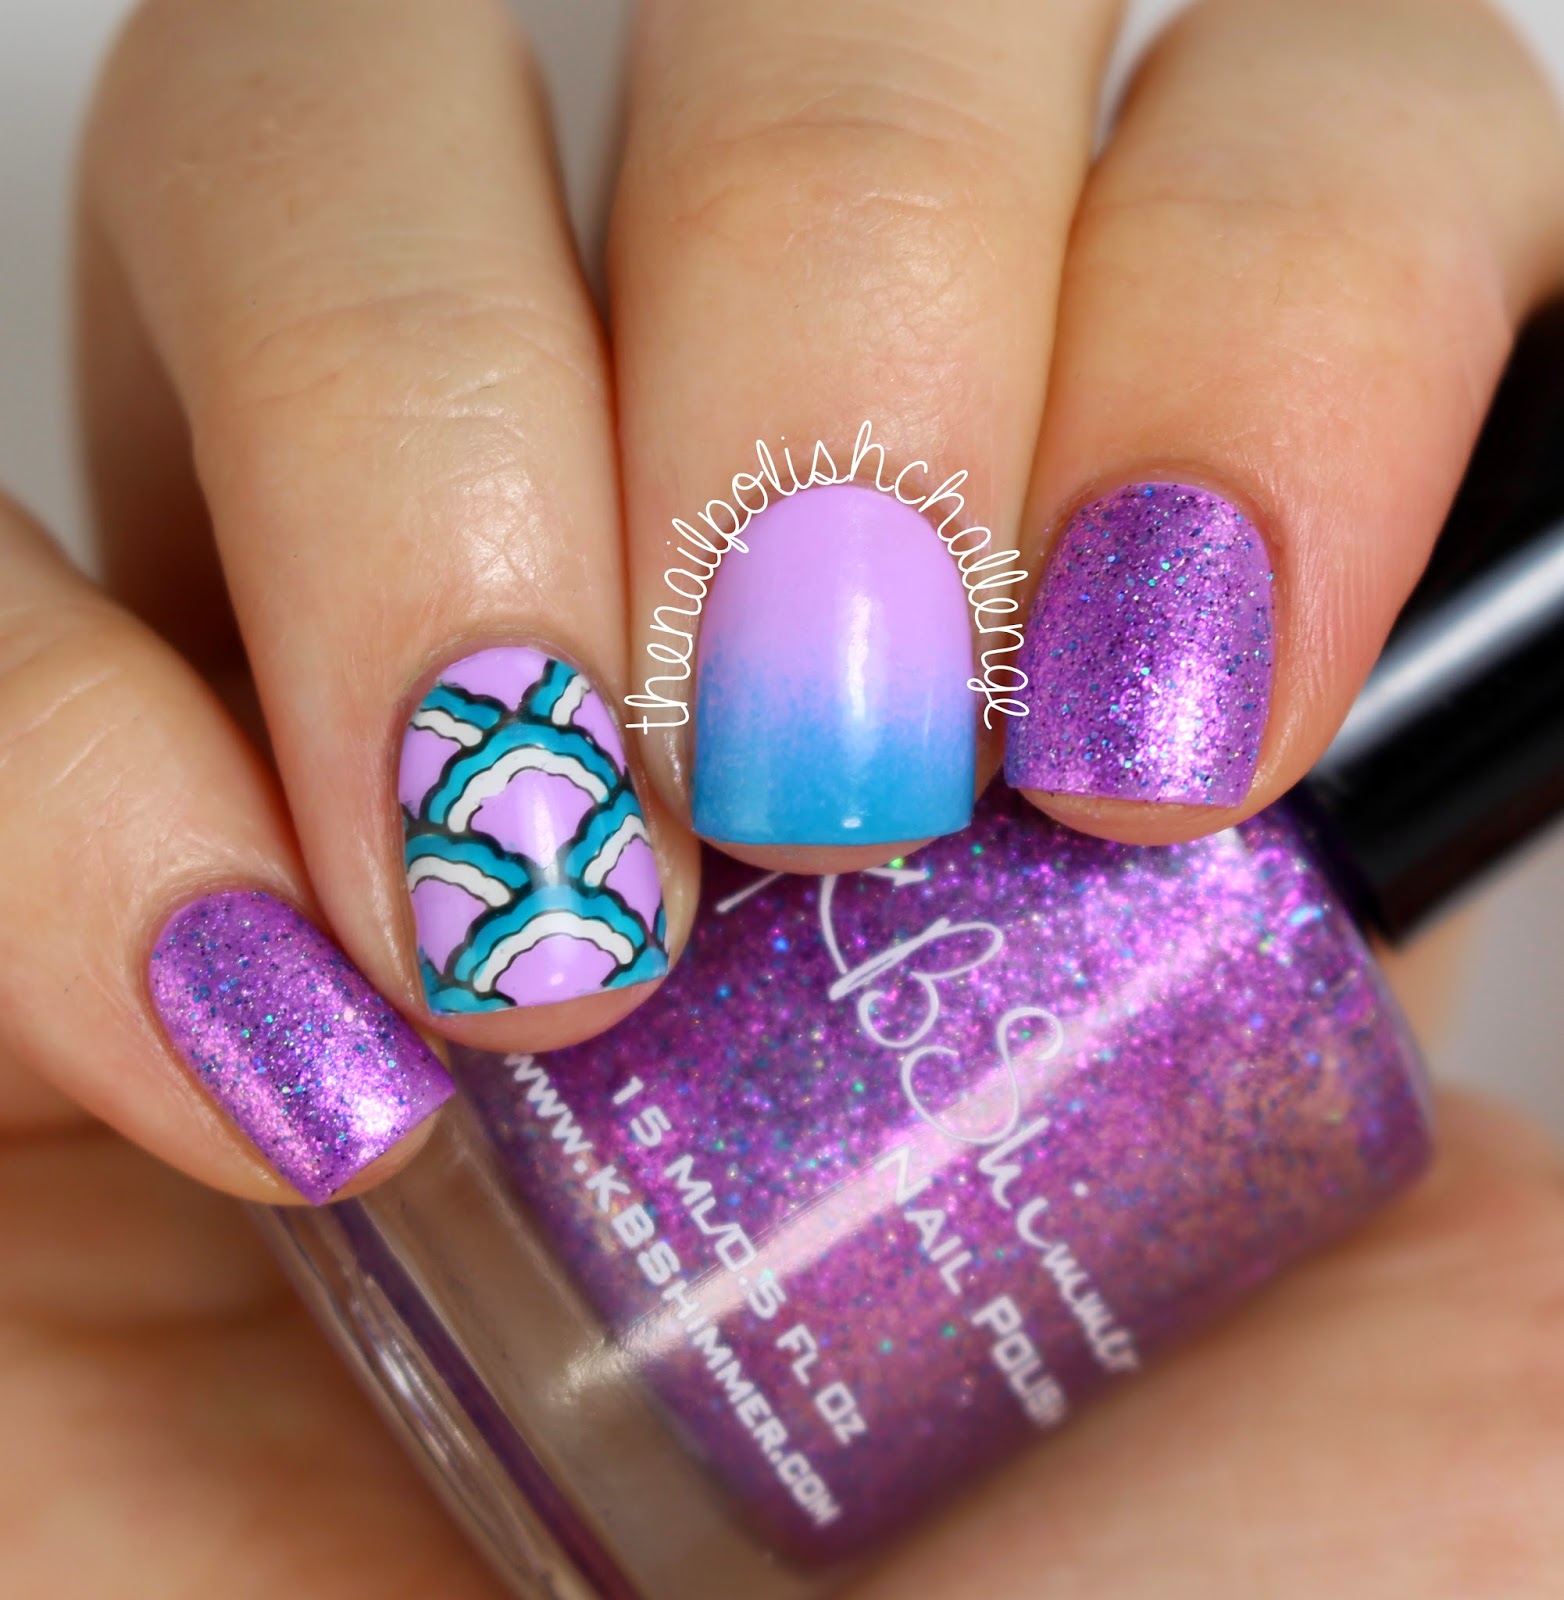 Reinovate: Guest Post - Kelli from The Nail Polish Challenge